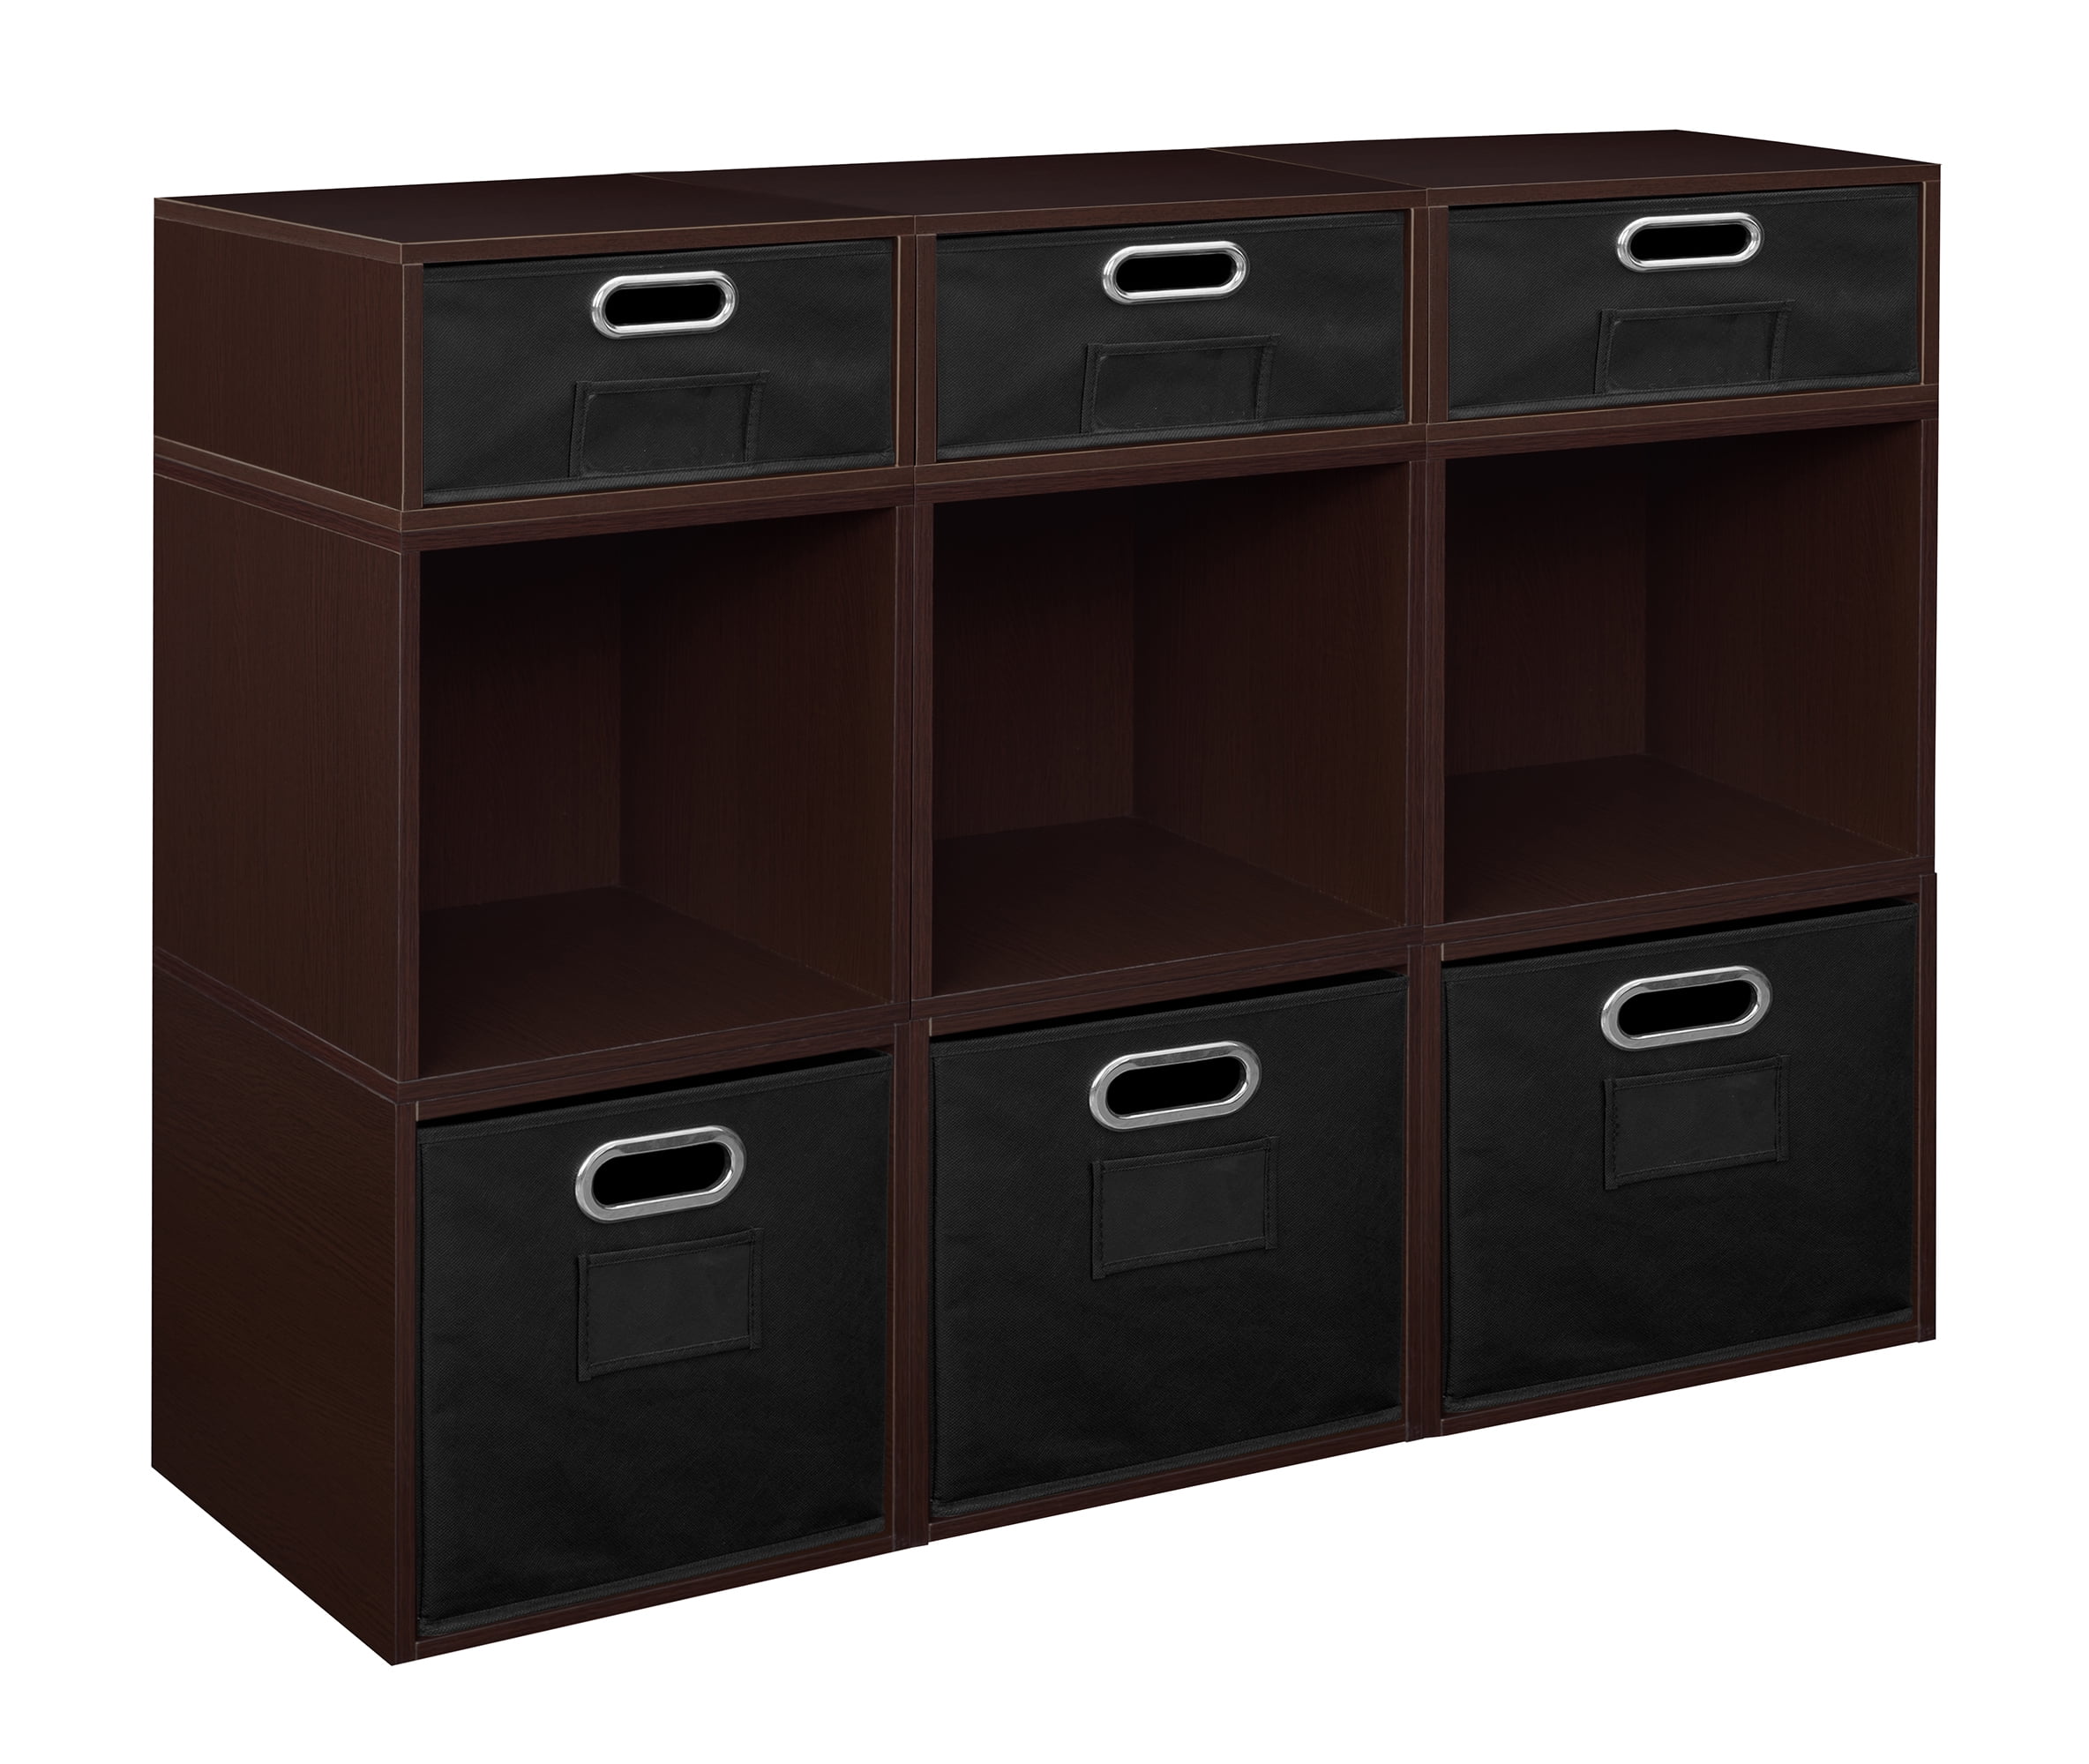 Niche Cubo Storage Set- 6 Full Cubes/3 Half Cubes with Foldable Storage ...